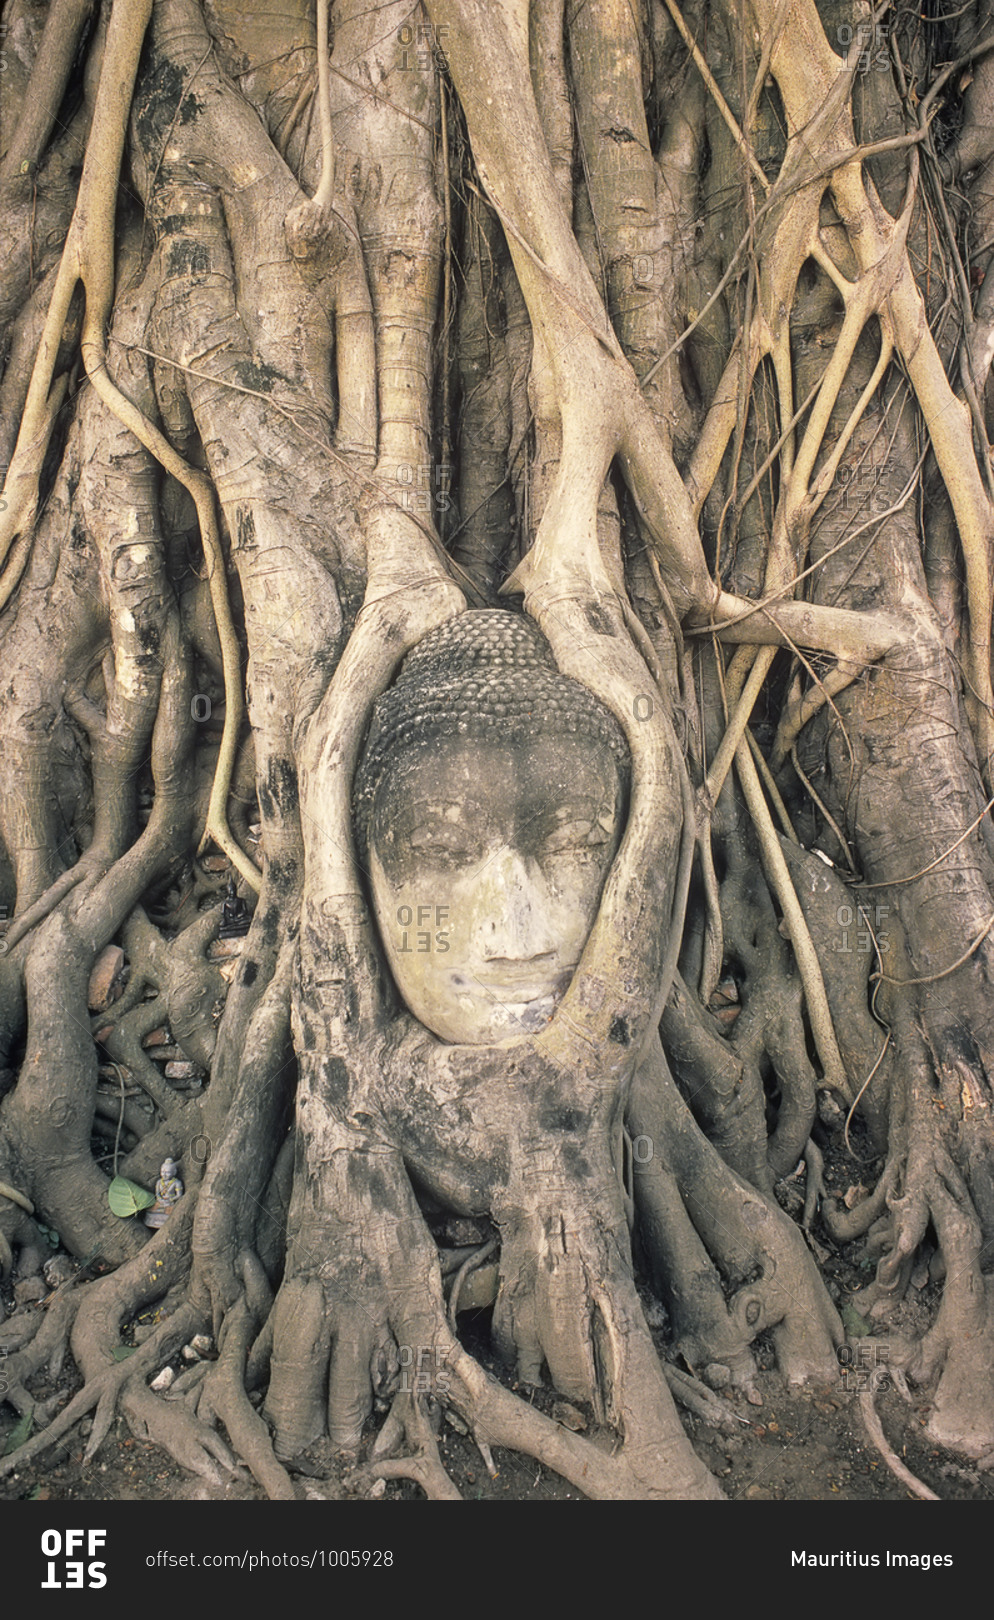 Stone Buddha Head entwined In roots of fig tree, Wat Phra Mahathat, Ayuthaya, Thailand, Asia